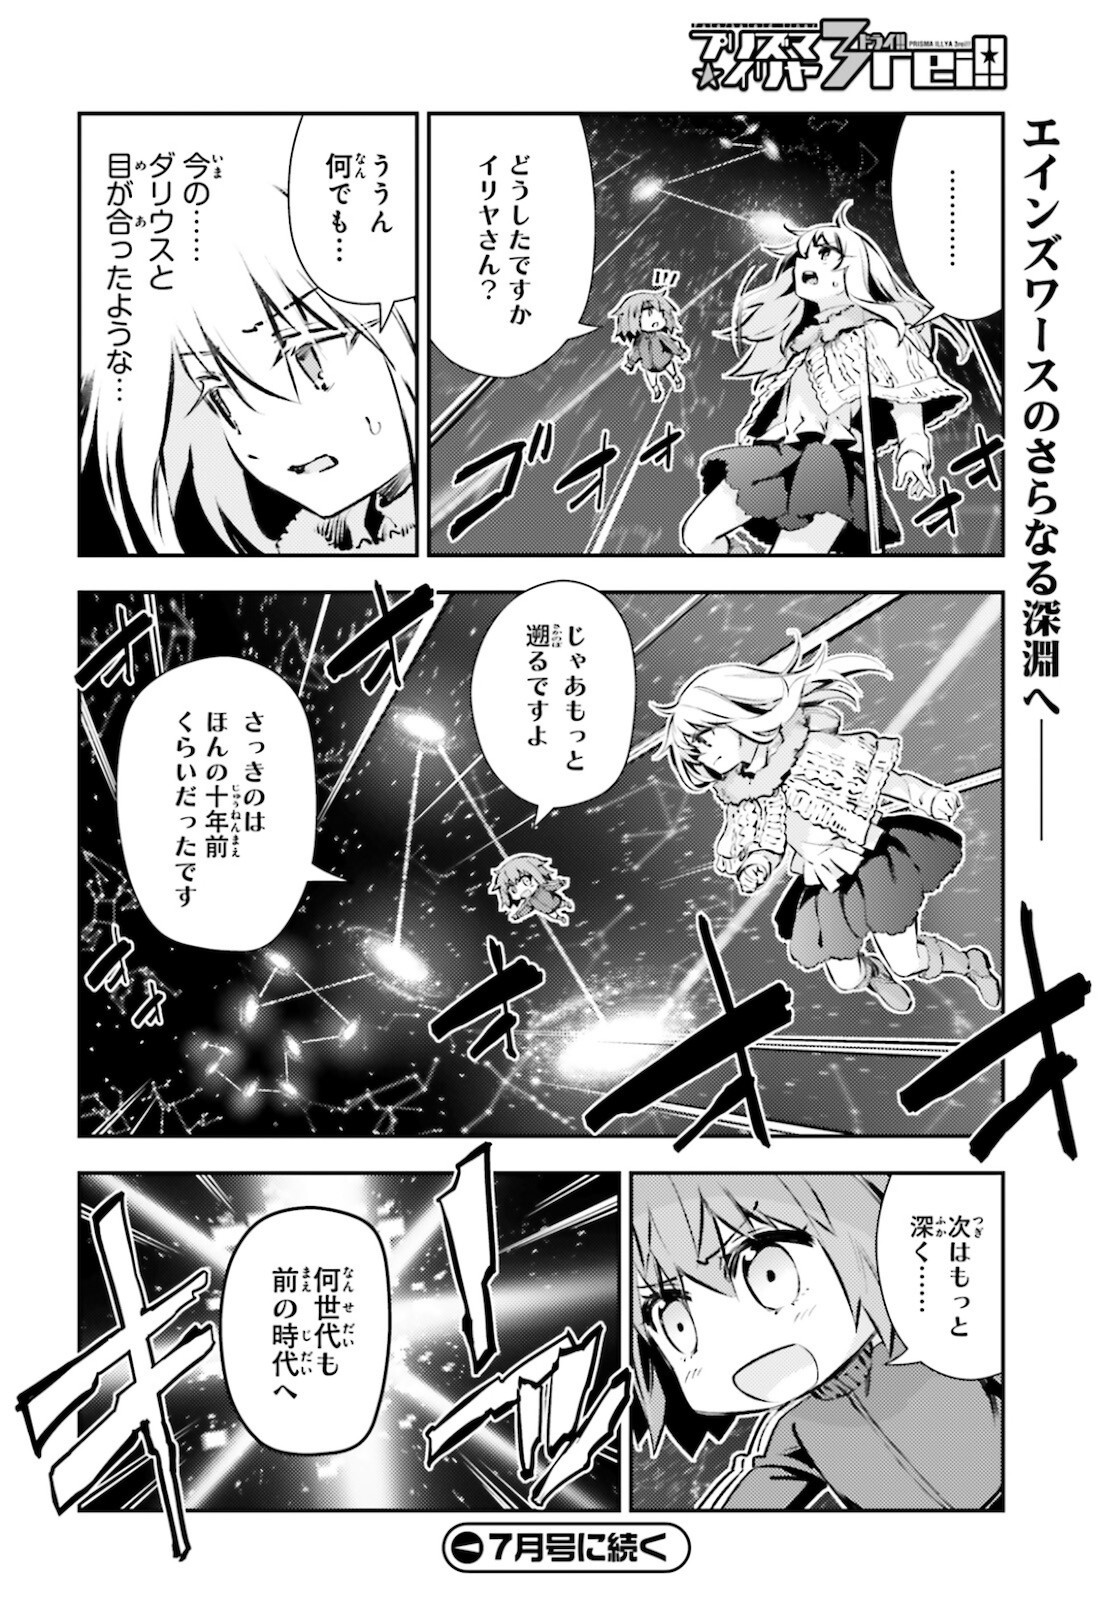 Fate/Kaleid Liner Prisma Illya Drei! - Chapter 63 - Page 16